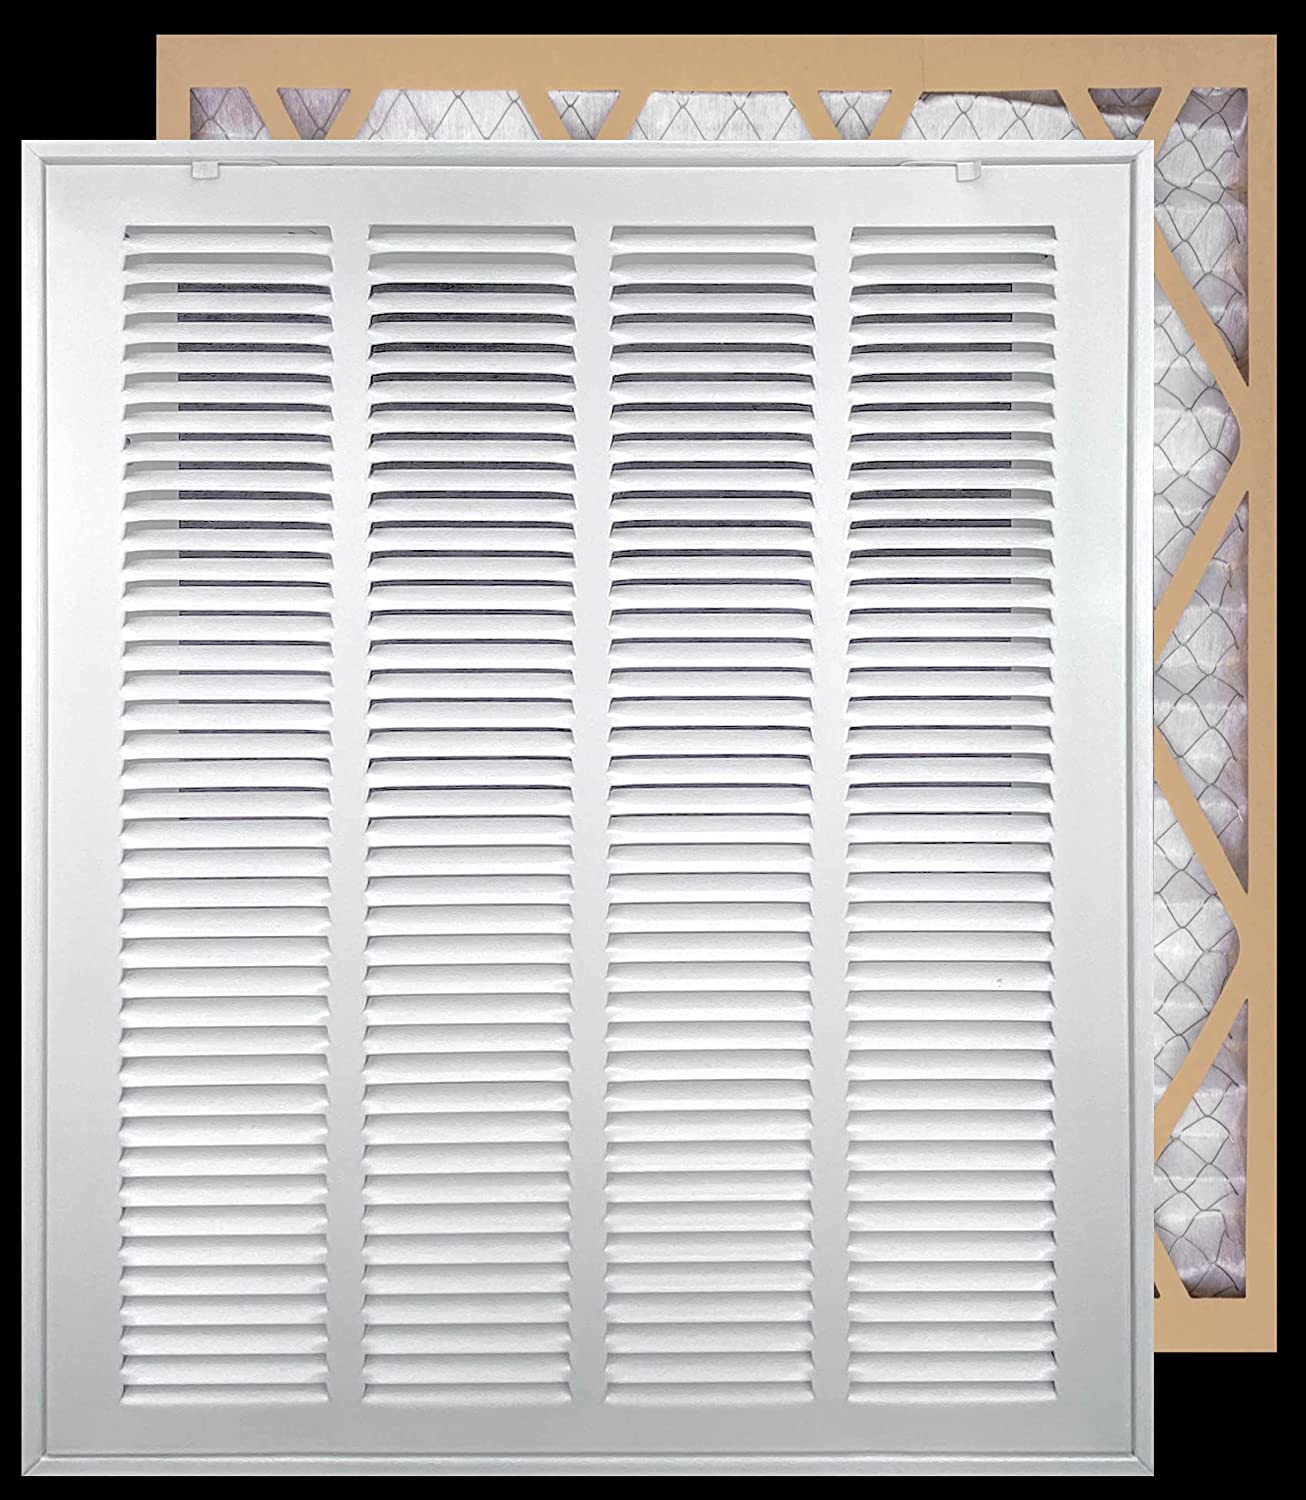 airgrilles 18" x 22" duct opening   filter included hd steel return air filter grille for sidewall and ceiling fil-7rafg1-wh-18x22 756014653052 - 1